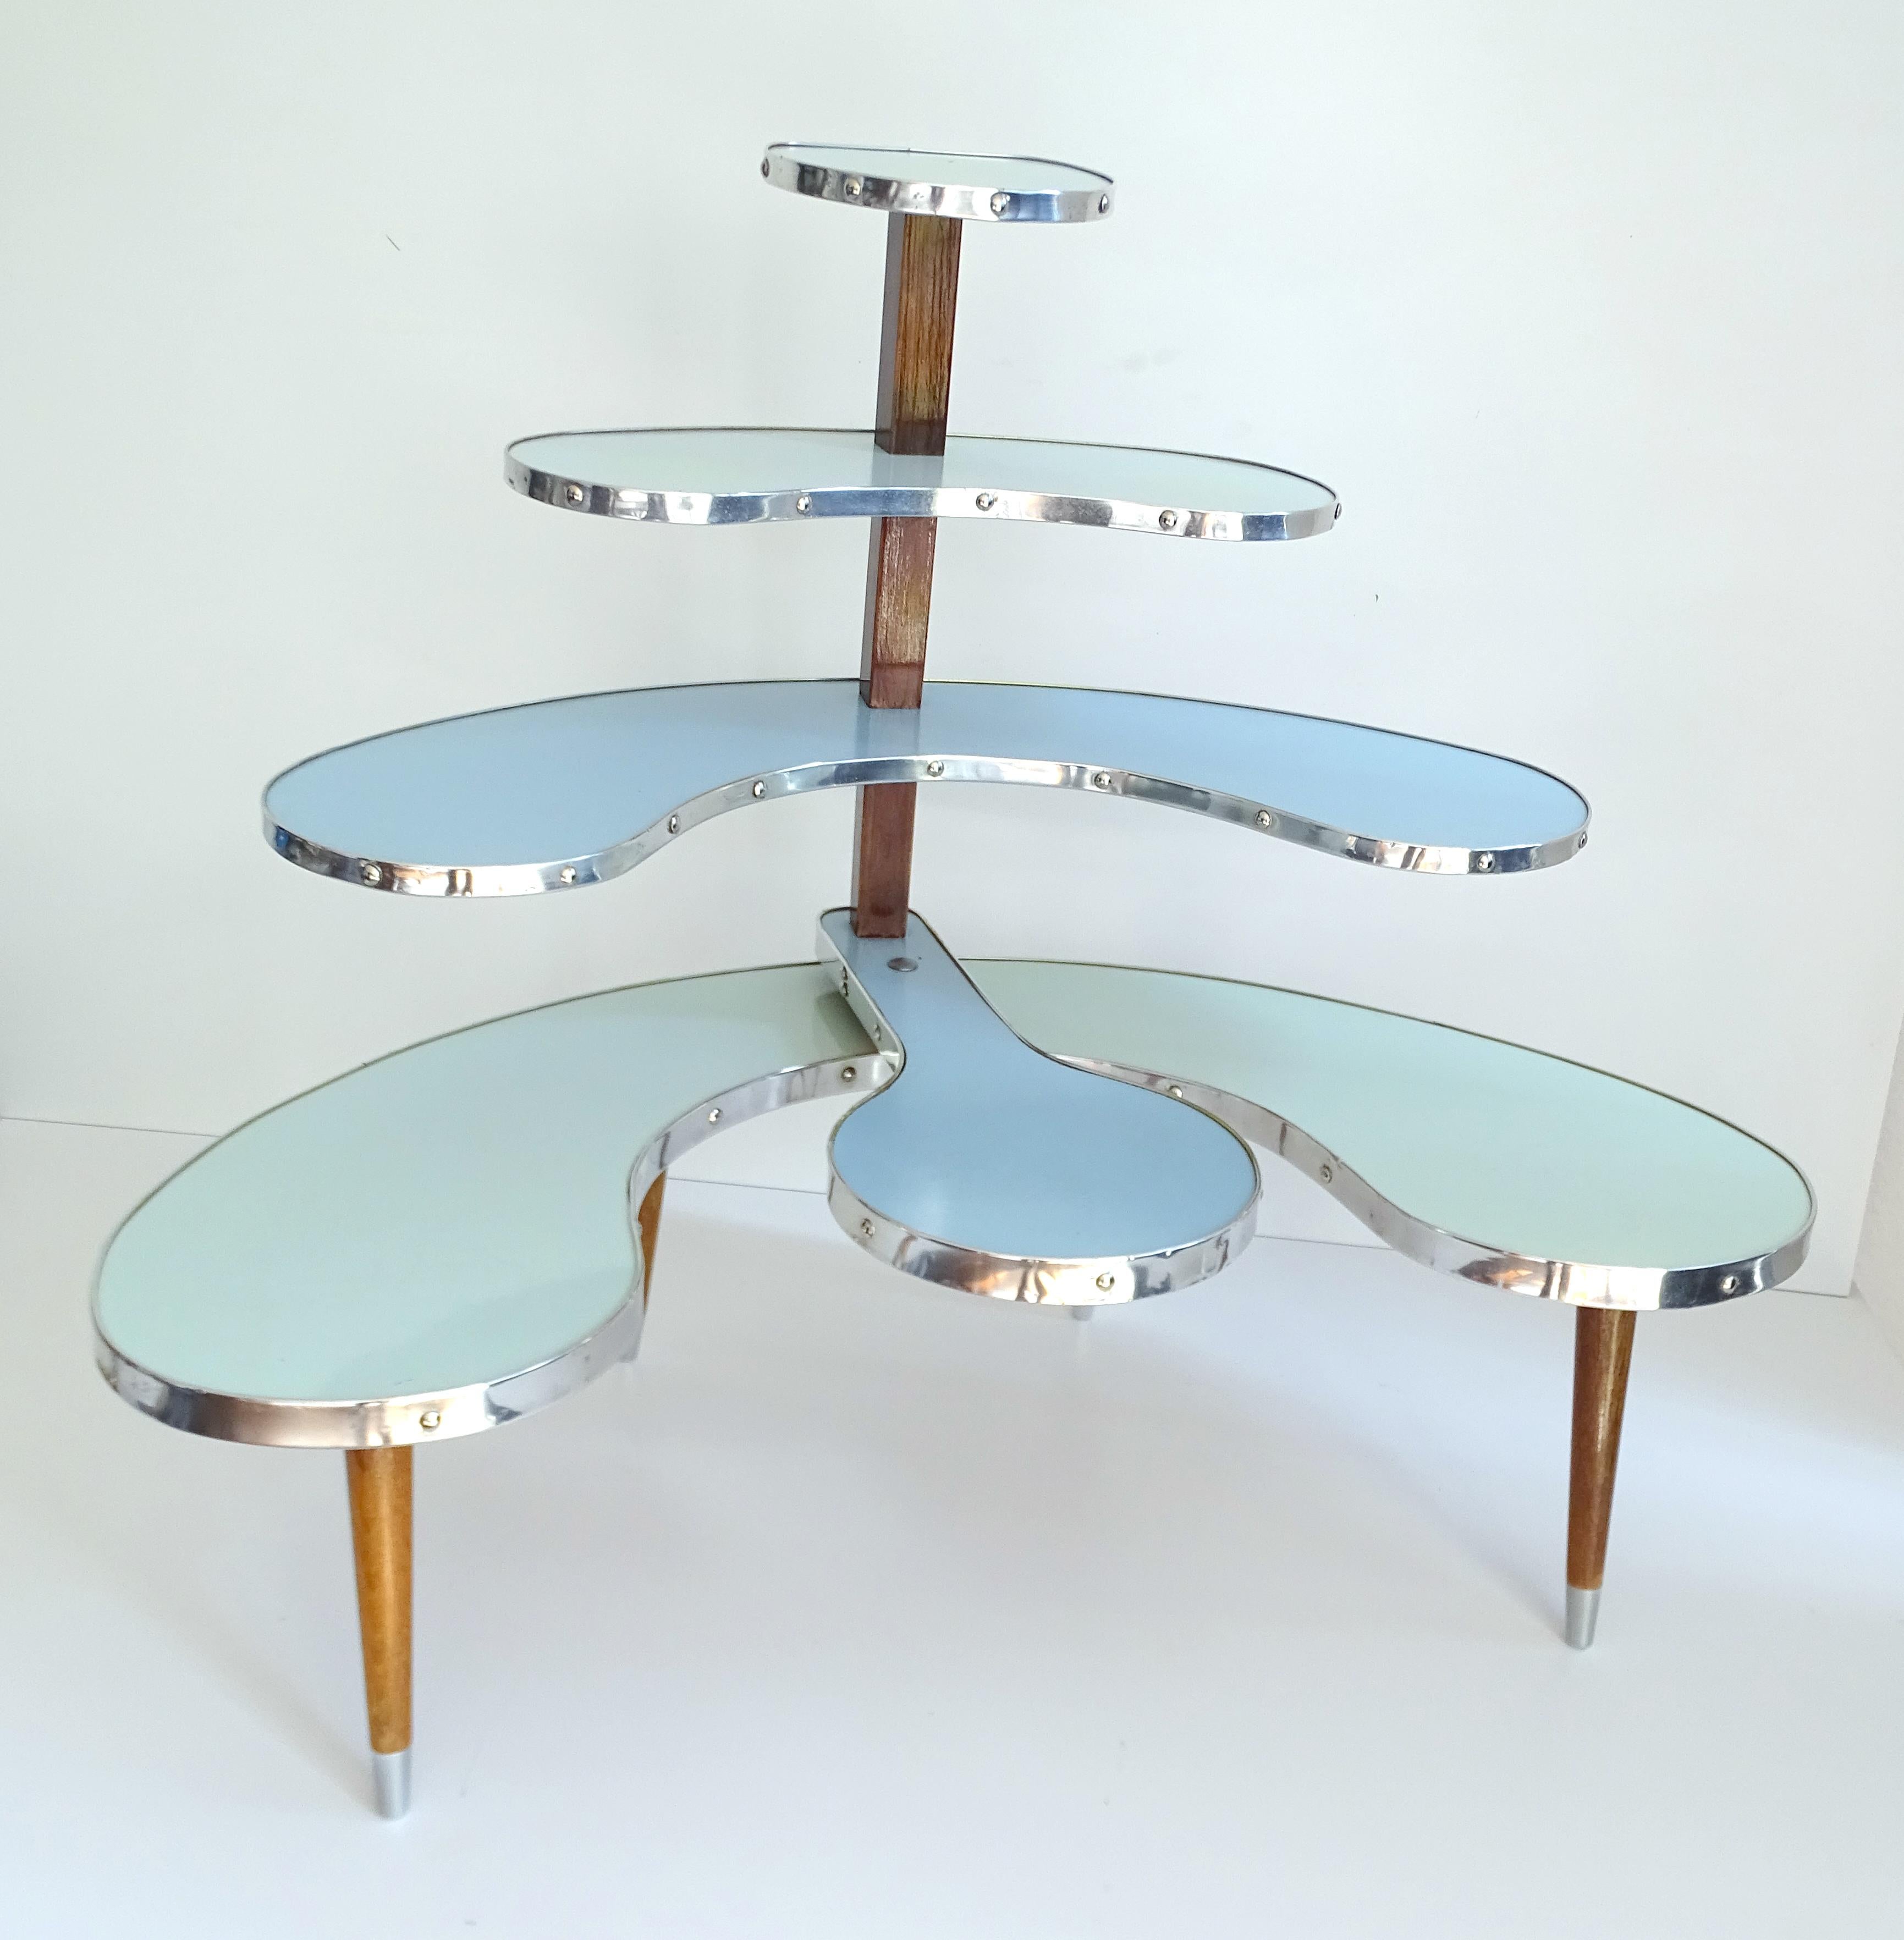 Exceptionnal multileveled Mid-Century Modern  side table / planter/ shelf, 1960s, very unusual design featuring a tree like structure made out of wood with 5 tiers turquoise and light kidney shaped laminate tablets, 
Dimensions
H 30.71 in. x W 36.23